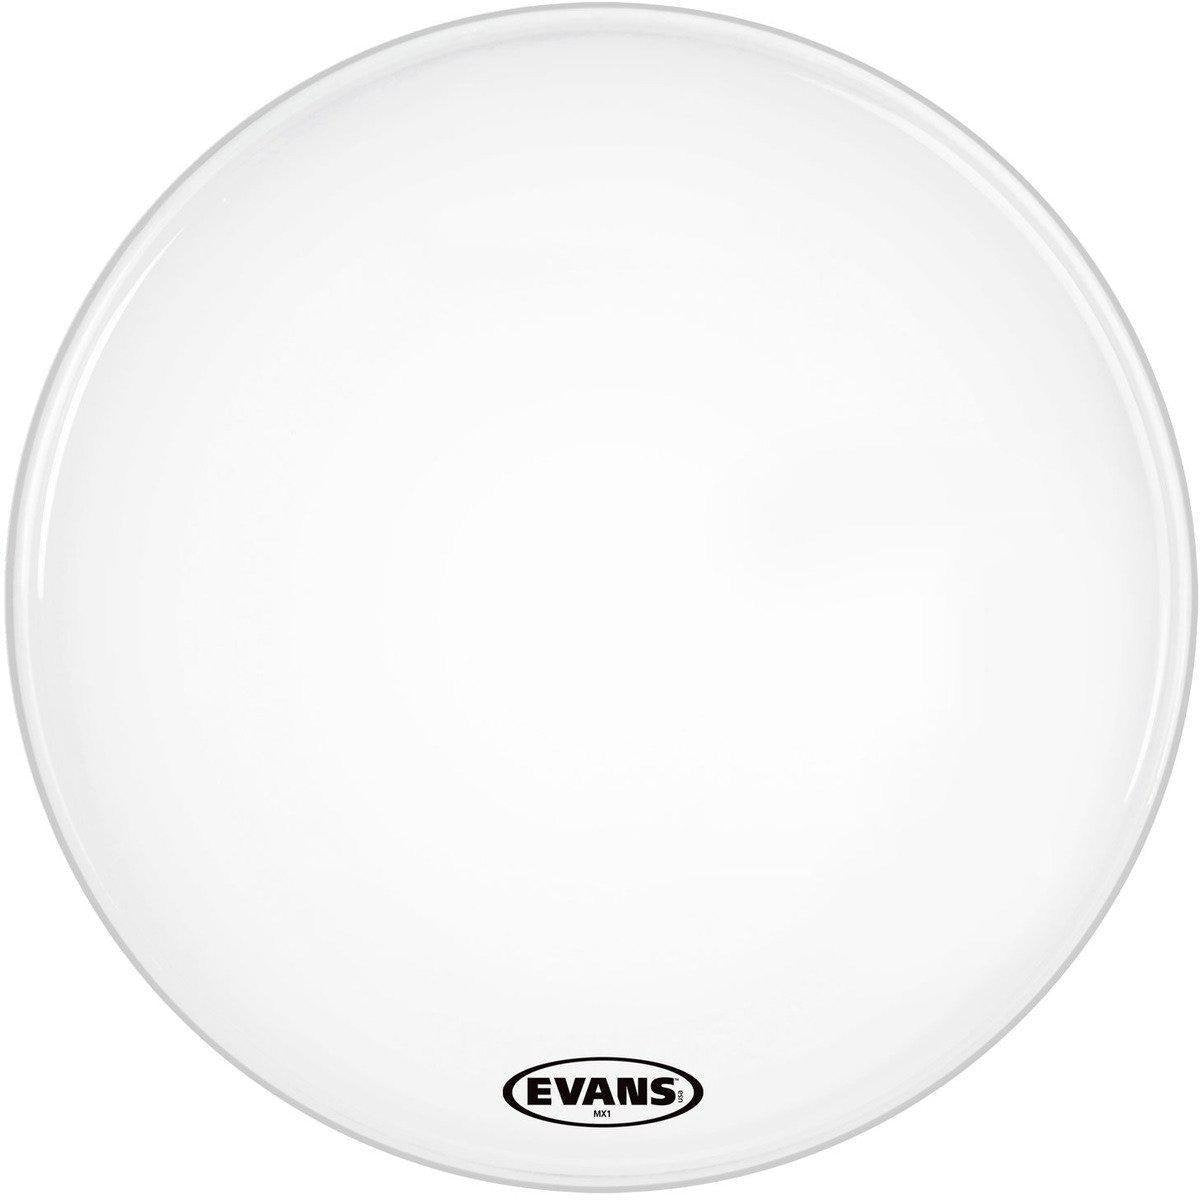 Evans MX1 White Marching Bass Drumhead-Andy's Music